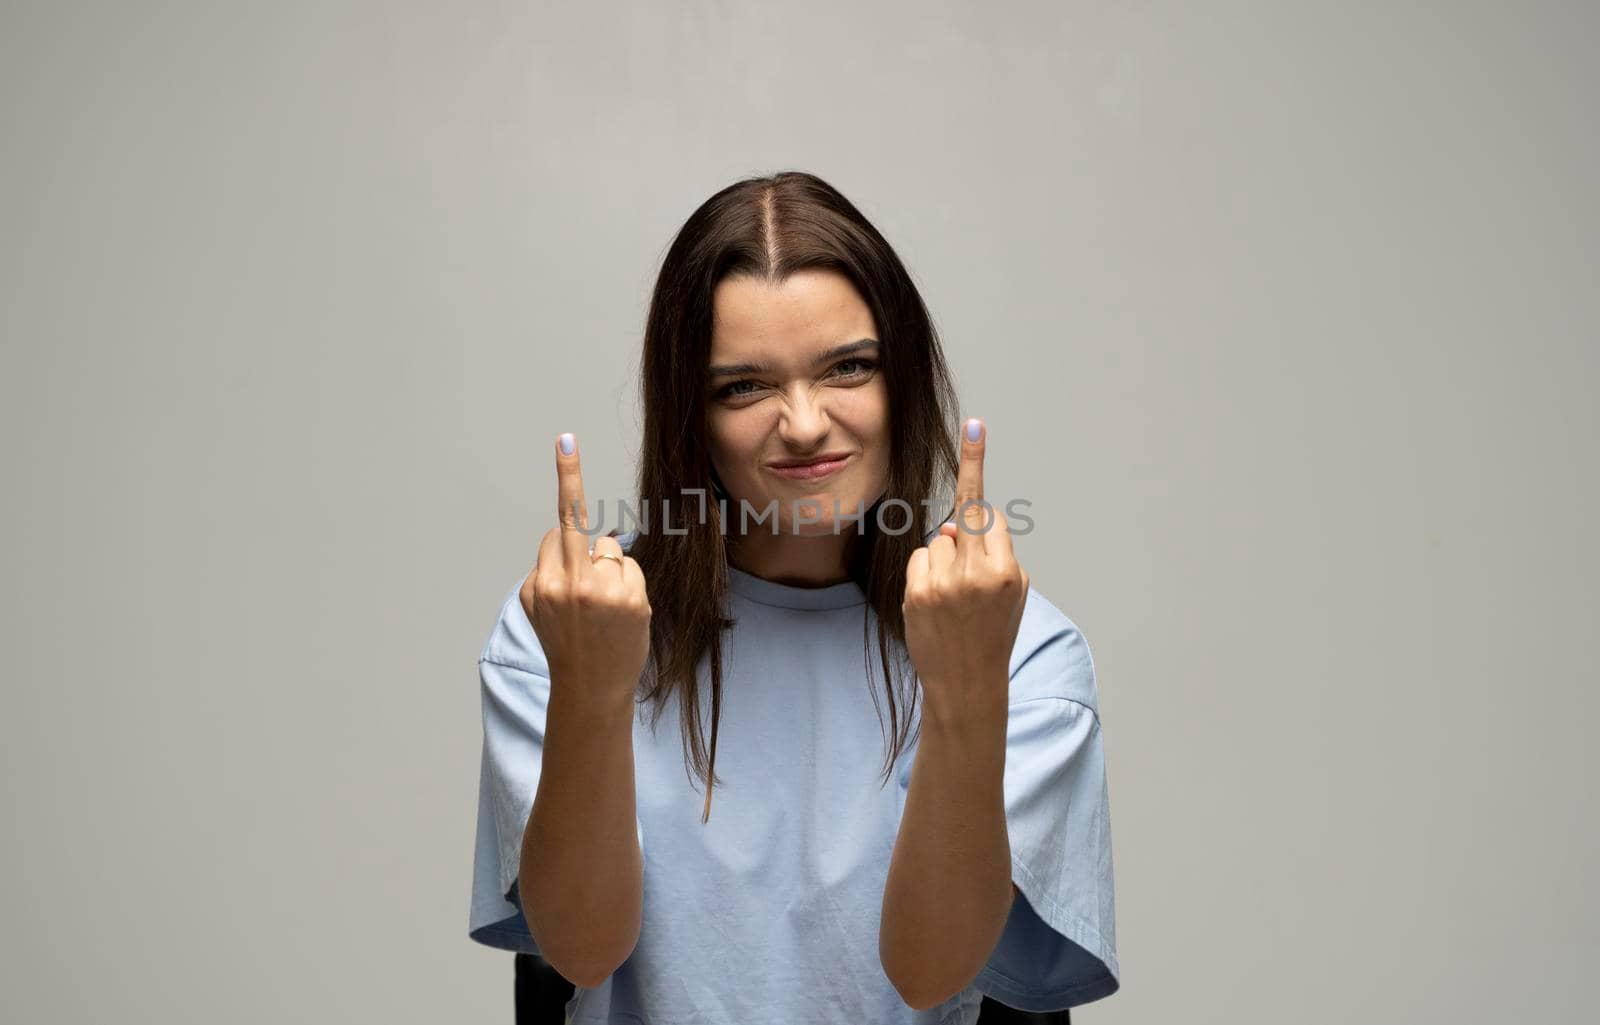 Portrait of rude vulgar woman showing middle fingers, impolite gesture of disrespect, looking with aggression hate on white background. by vovsht